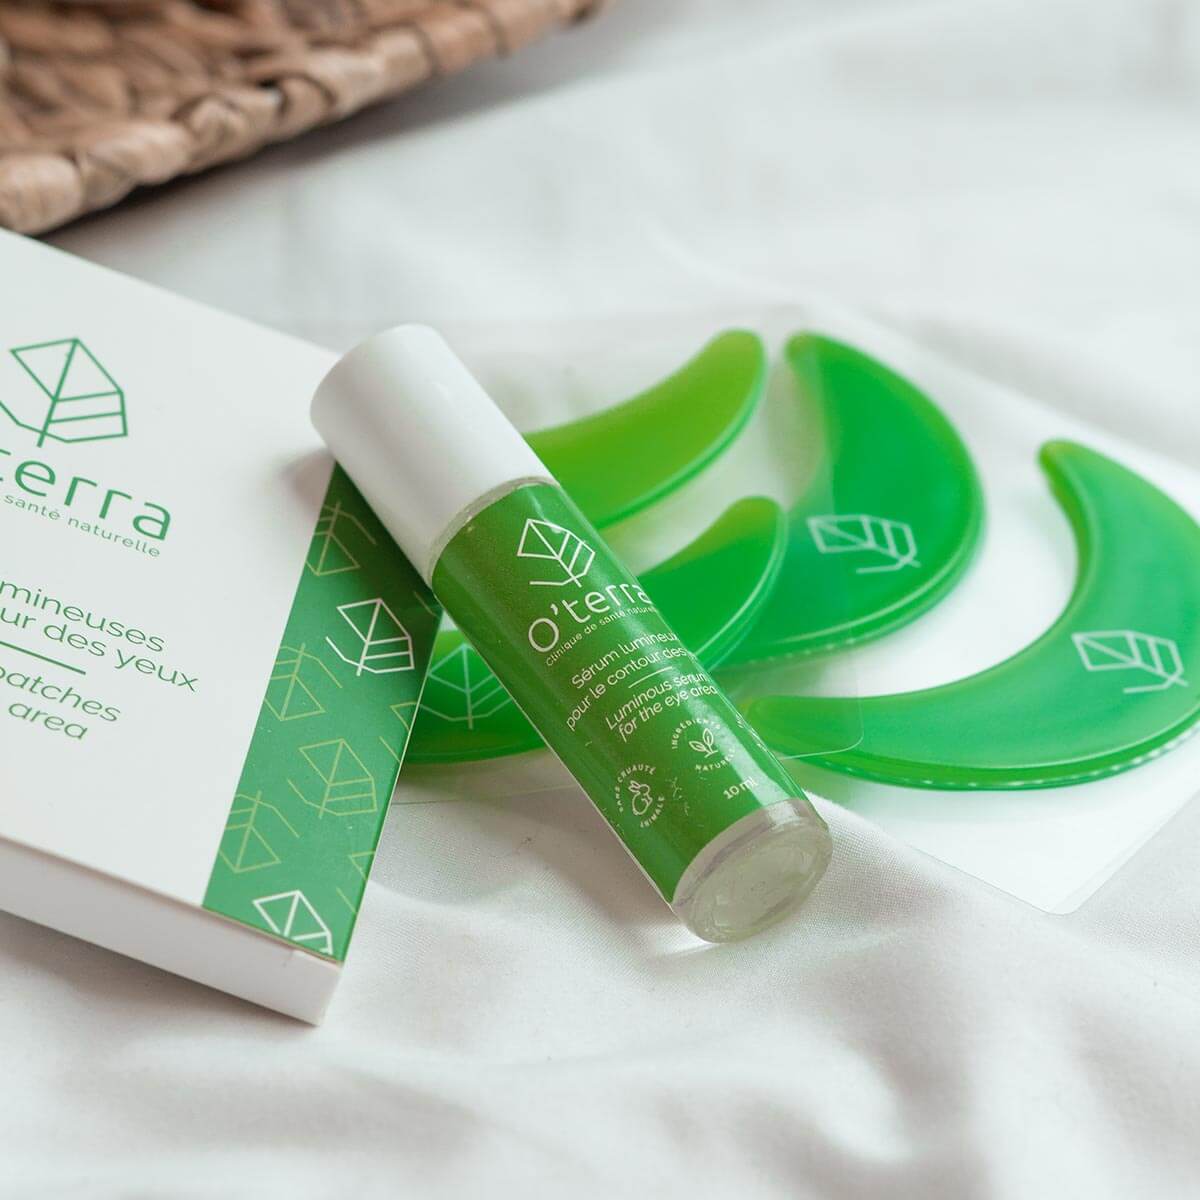 O'terra Luminous patches & serum for the eye area 2 items